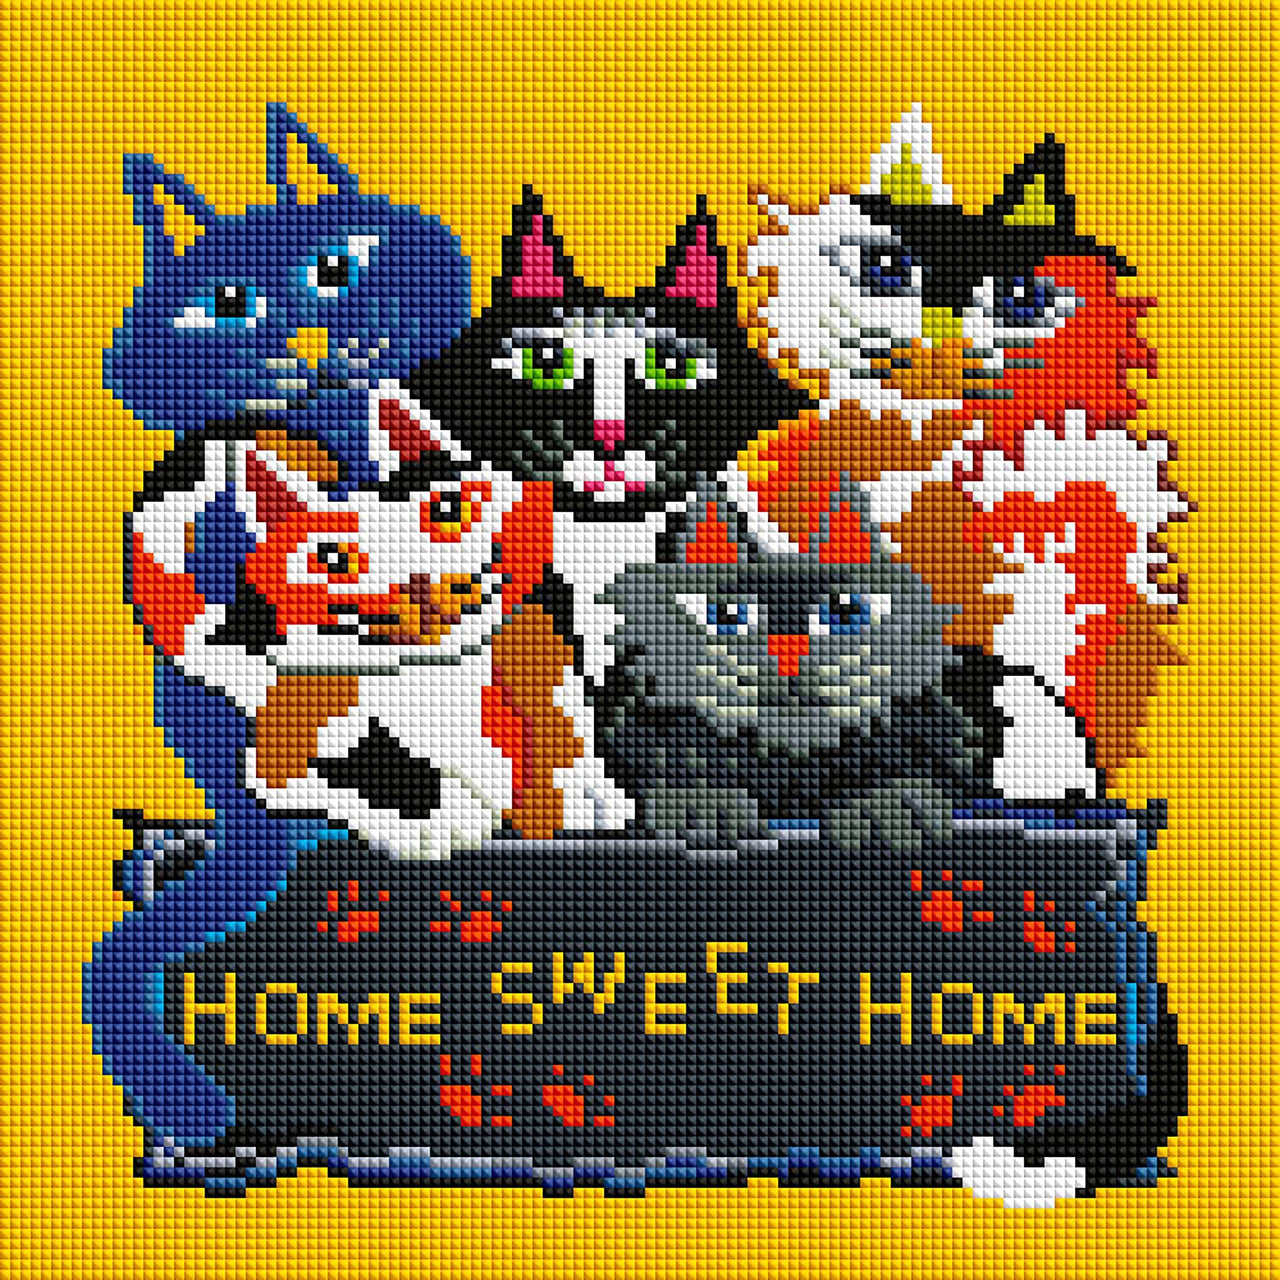 Diamond Painting Home Sweet Home Cats Square With 22 Colors / 12.6″ x 12.6″ (32cm x 32cm) / 15,625